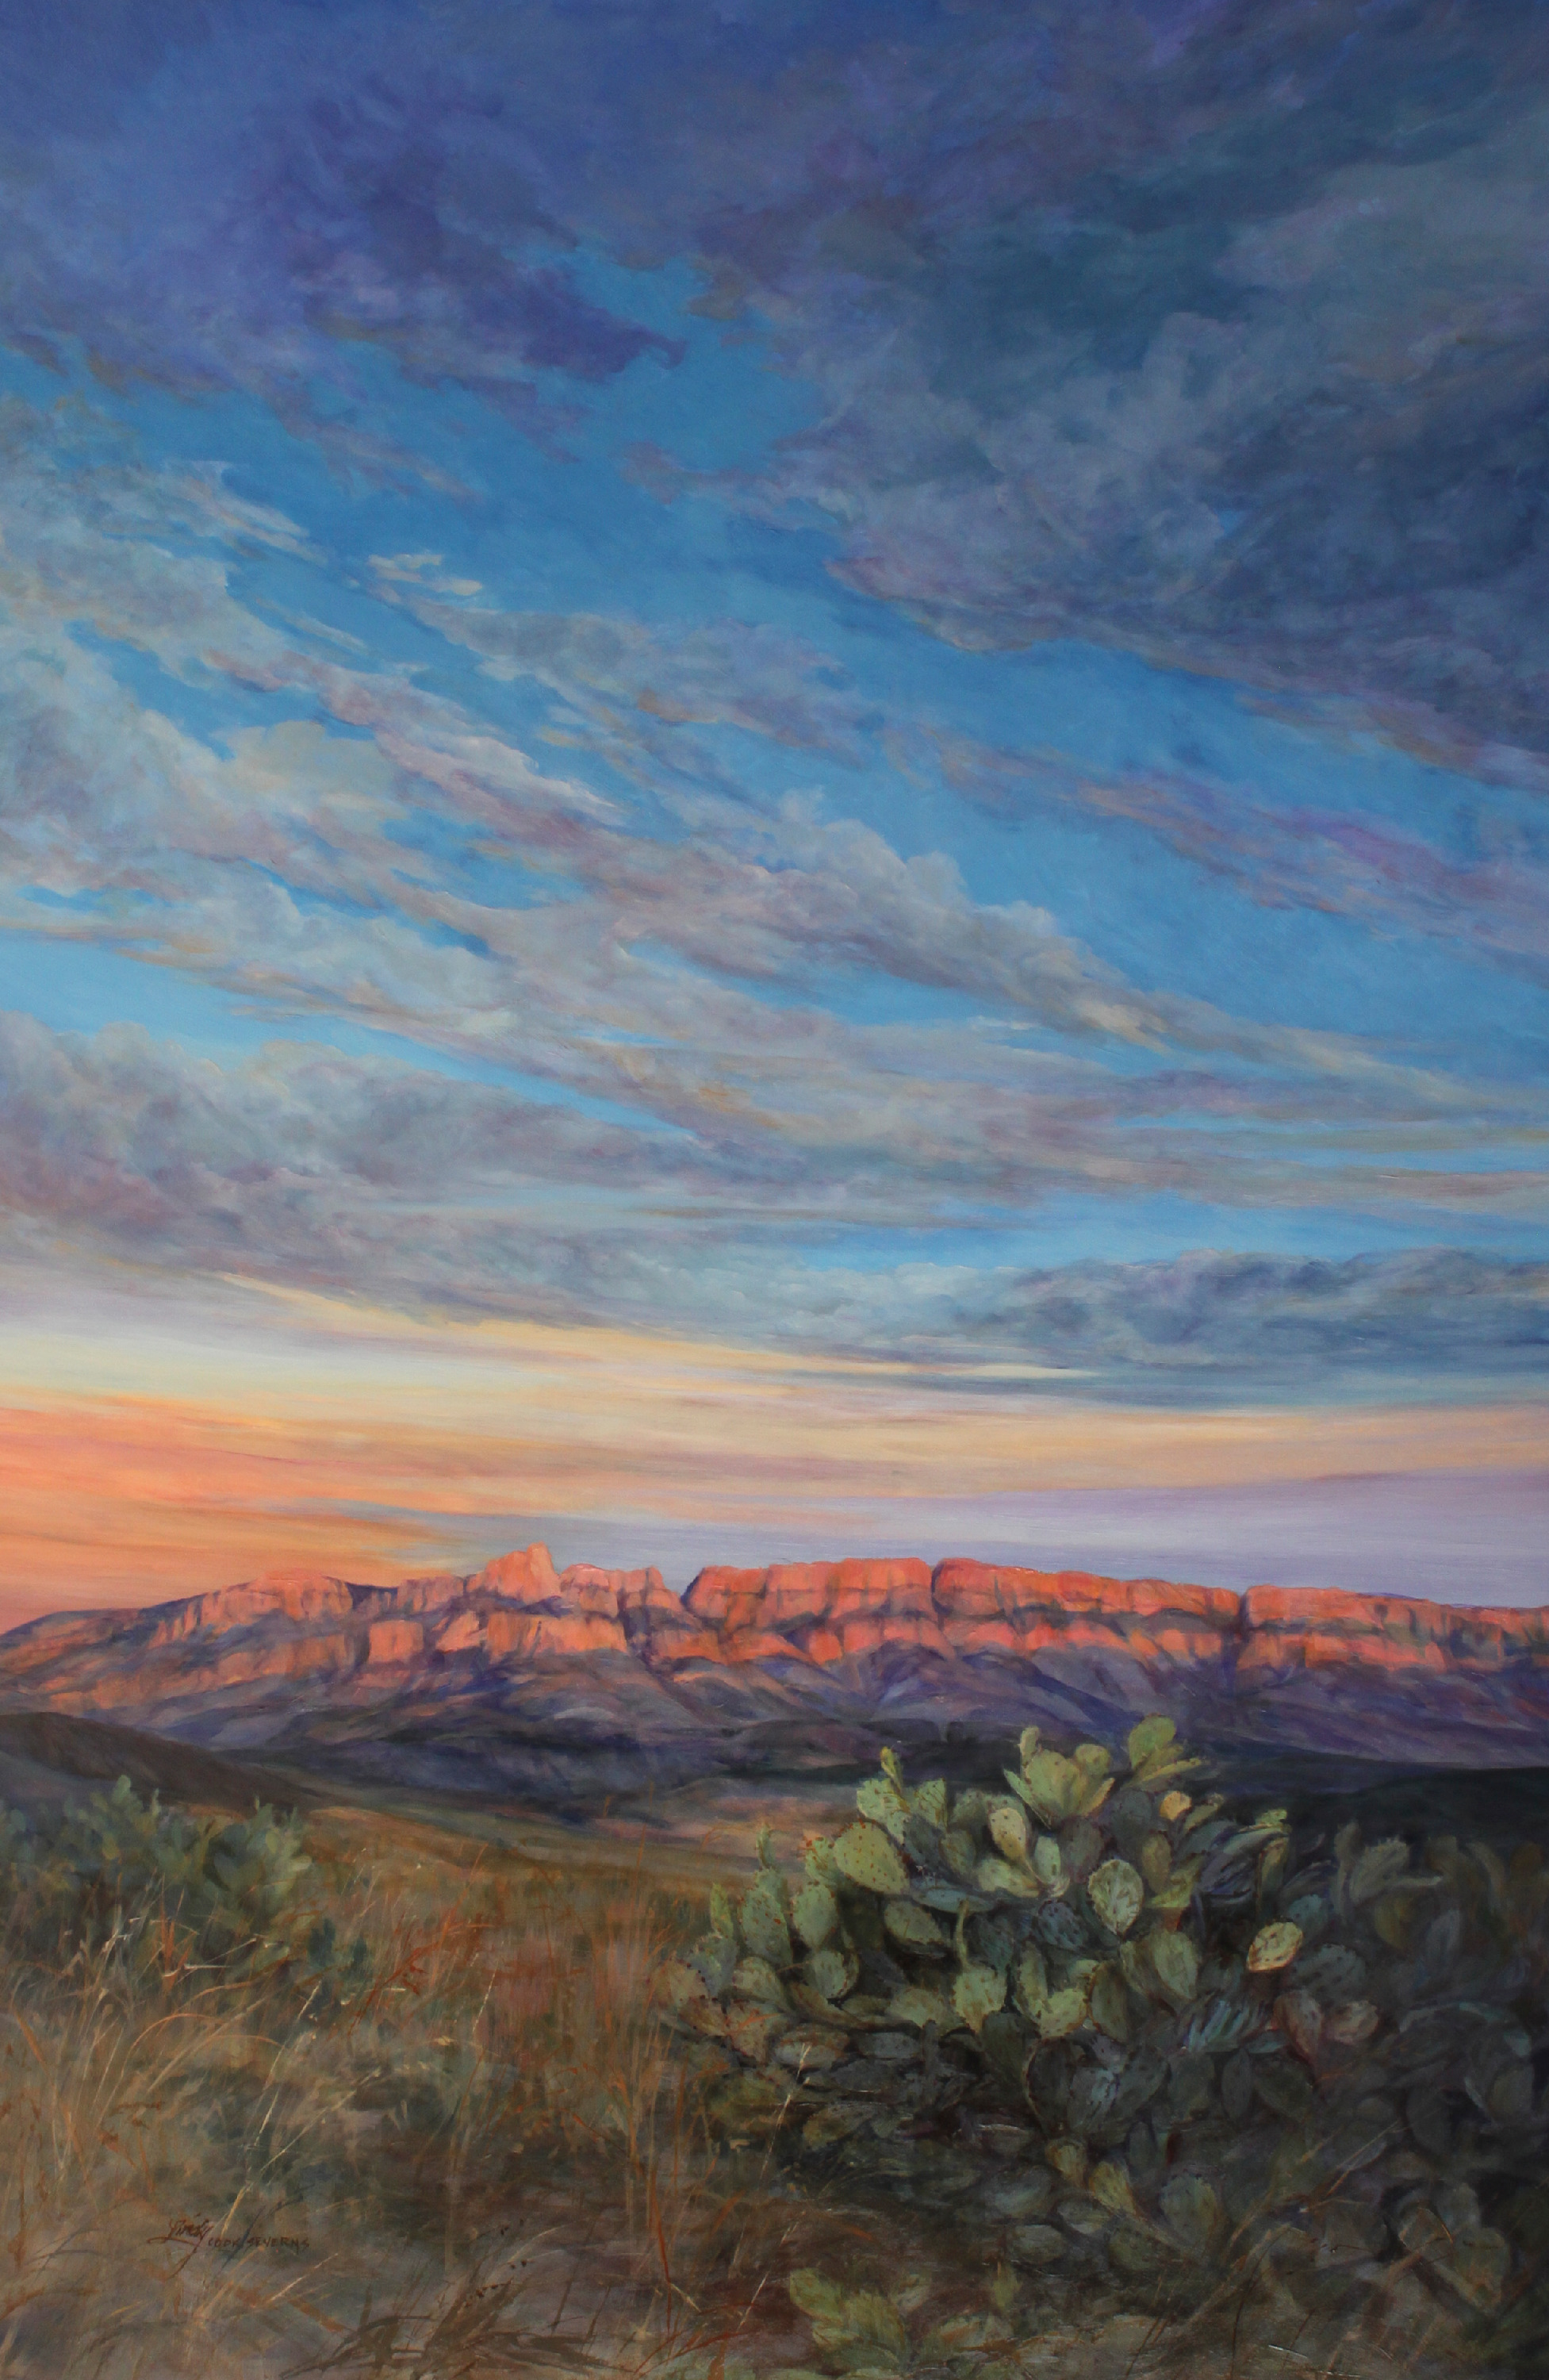 26k17 sierra del carmen in the arms of the setting sun 36x24 oil lindy c severns bay mzrlog